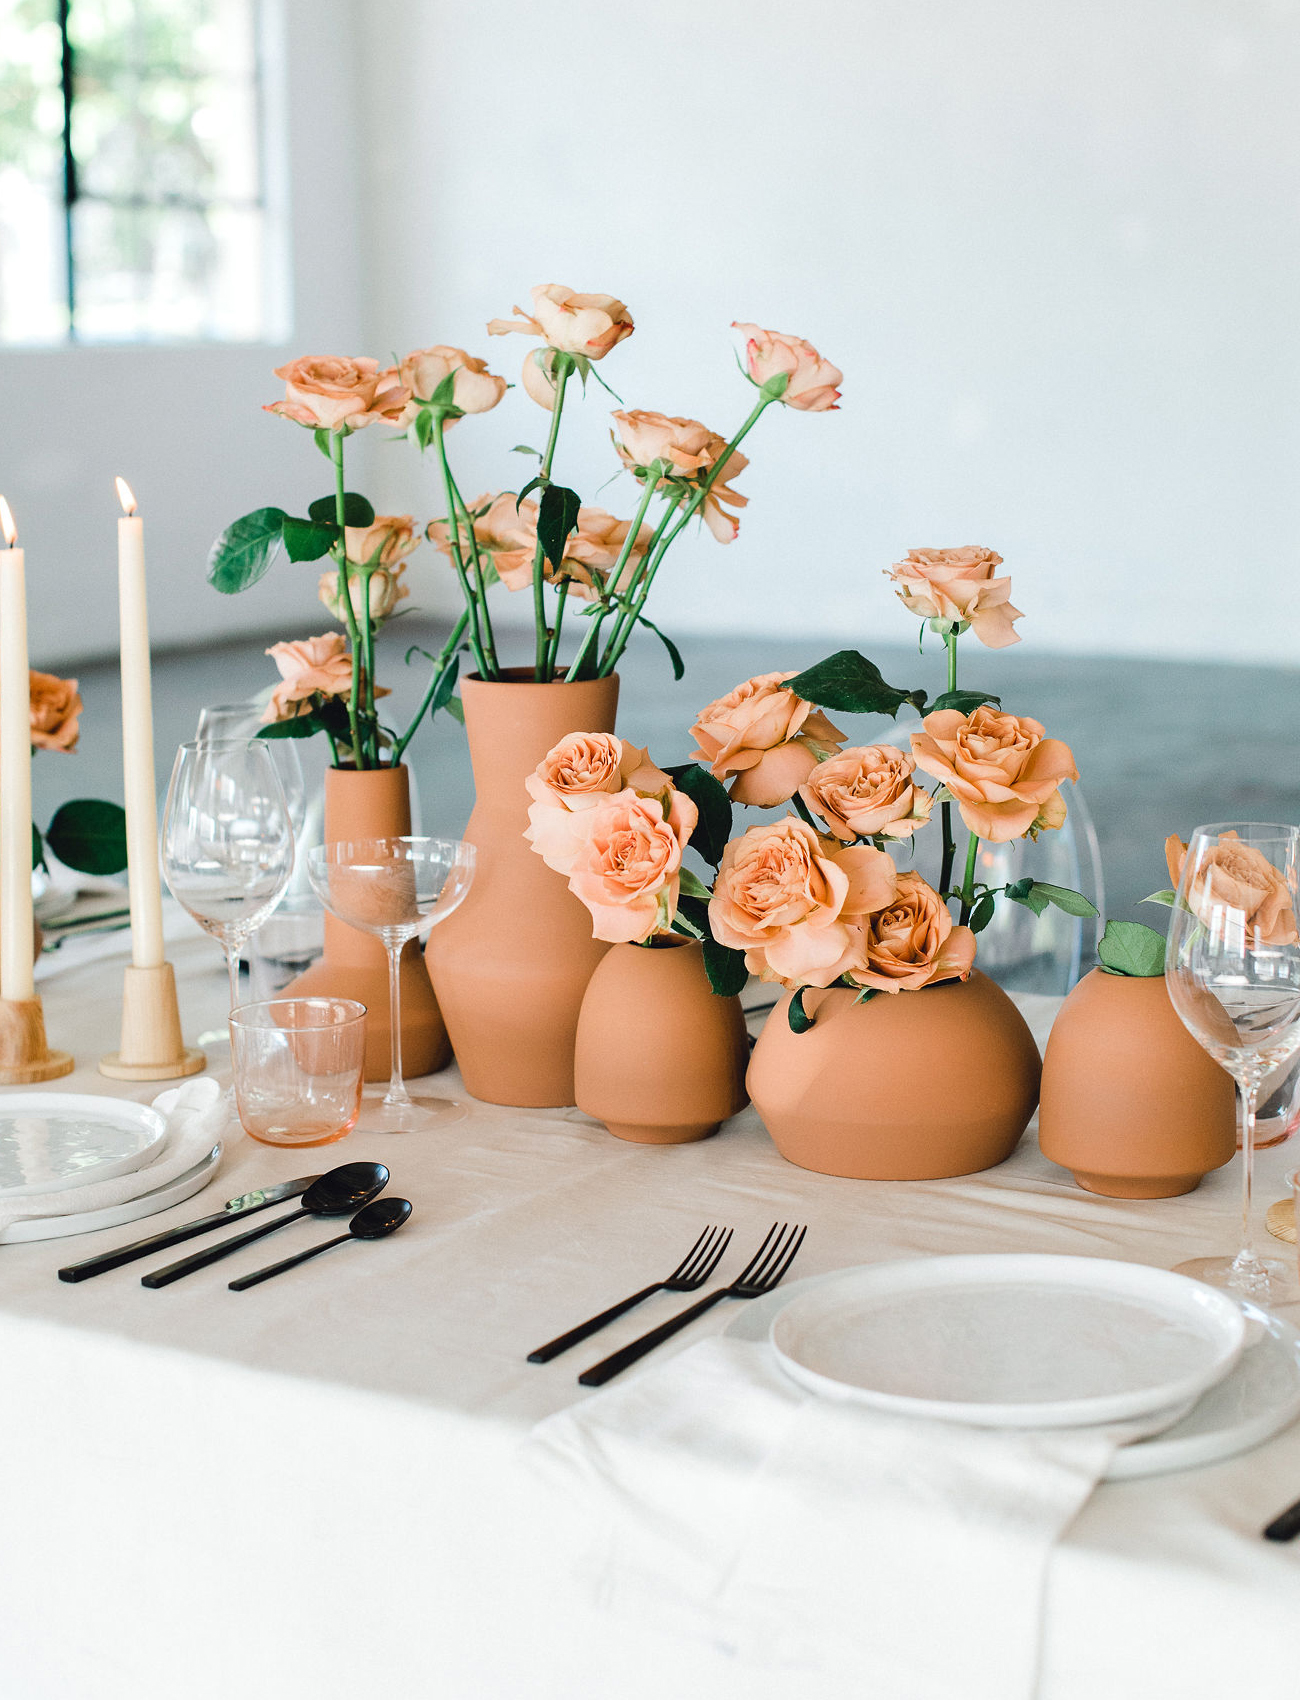 Mono-floral centerpiece of terracotta vases with rust tone roses